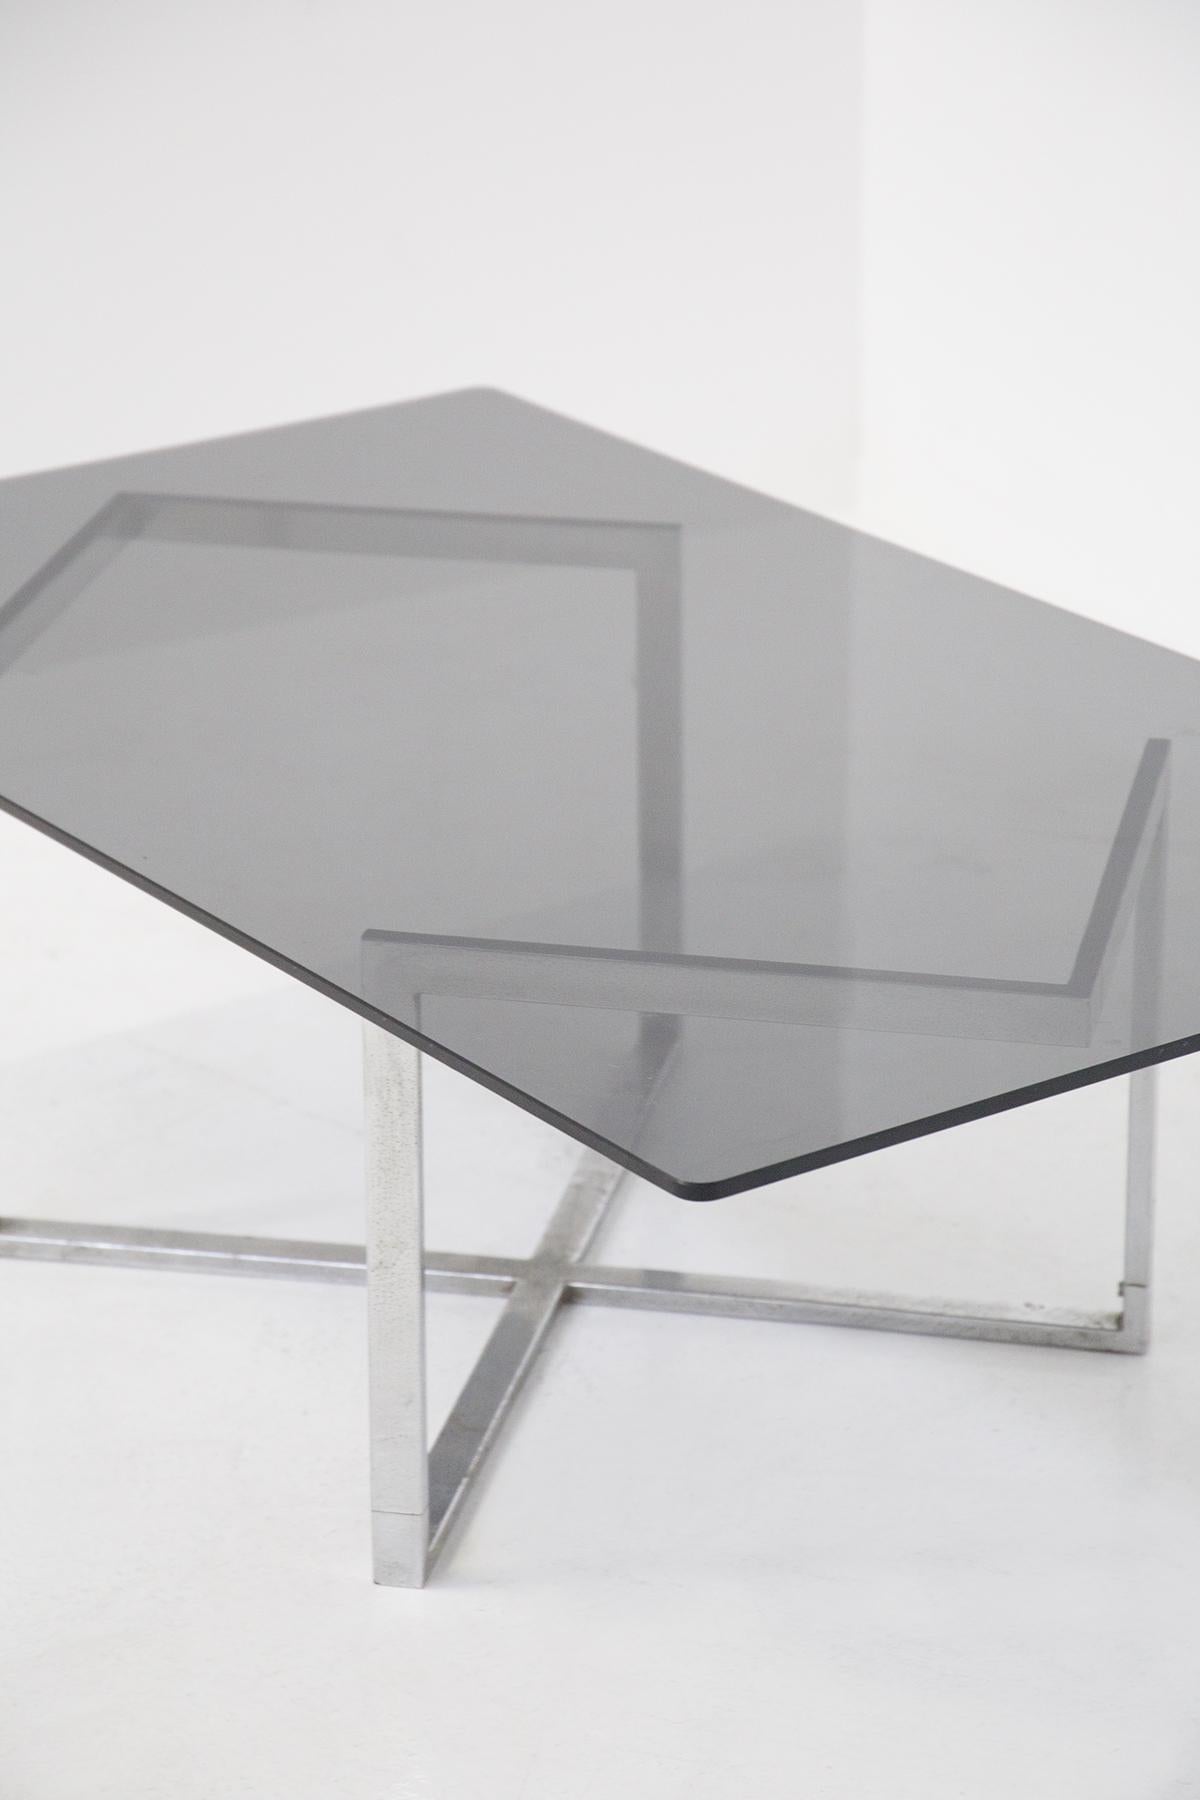 Mid-Century Modern Smoking Table in Glass and Steel by Vittorio Introini from Vip's Residence For Sale